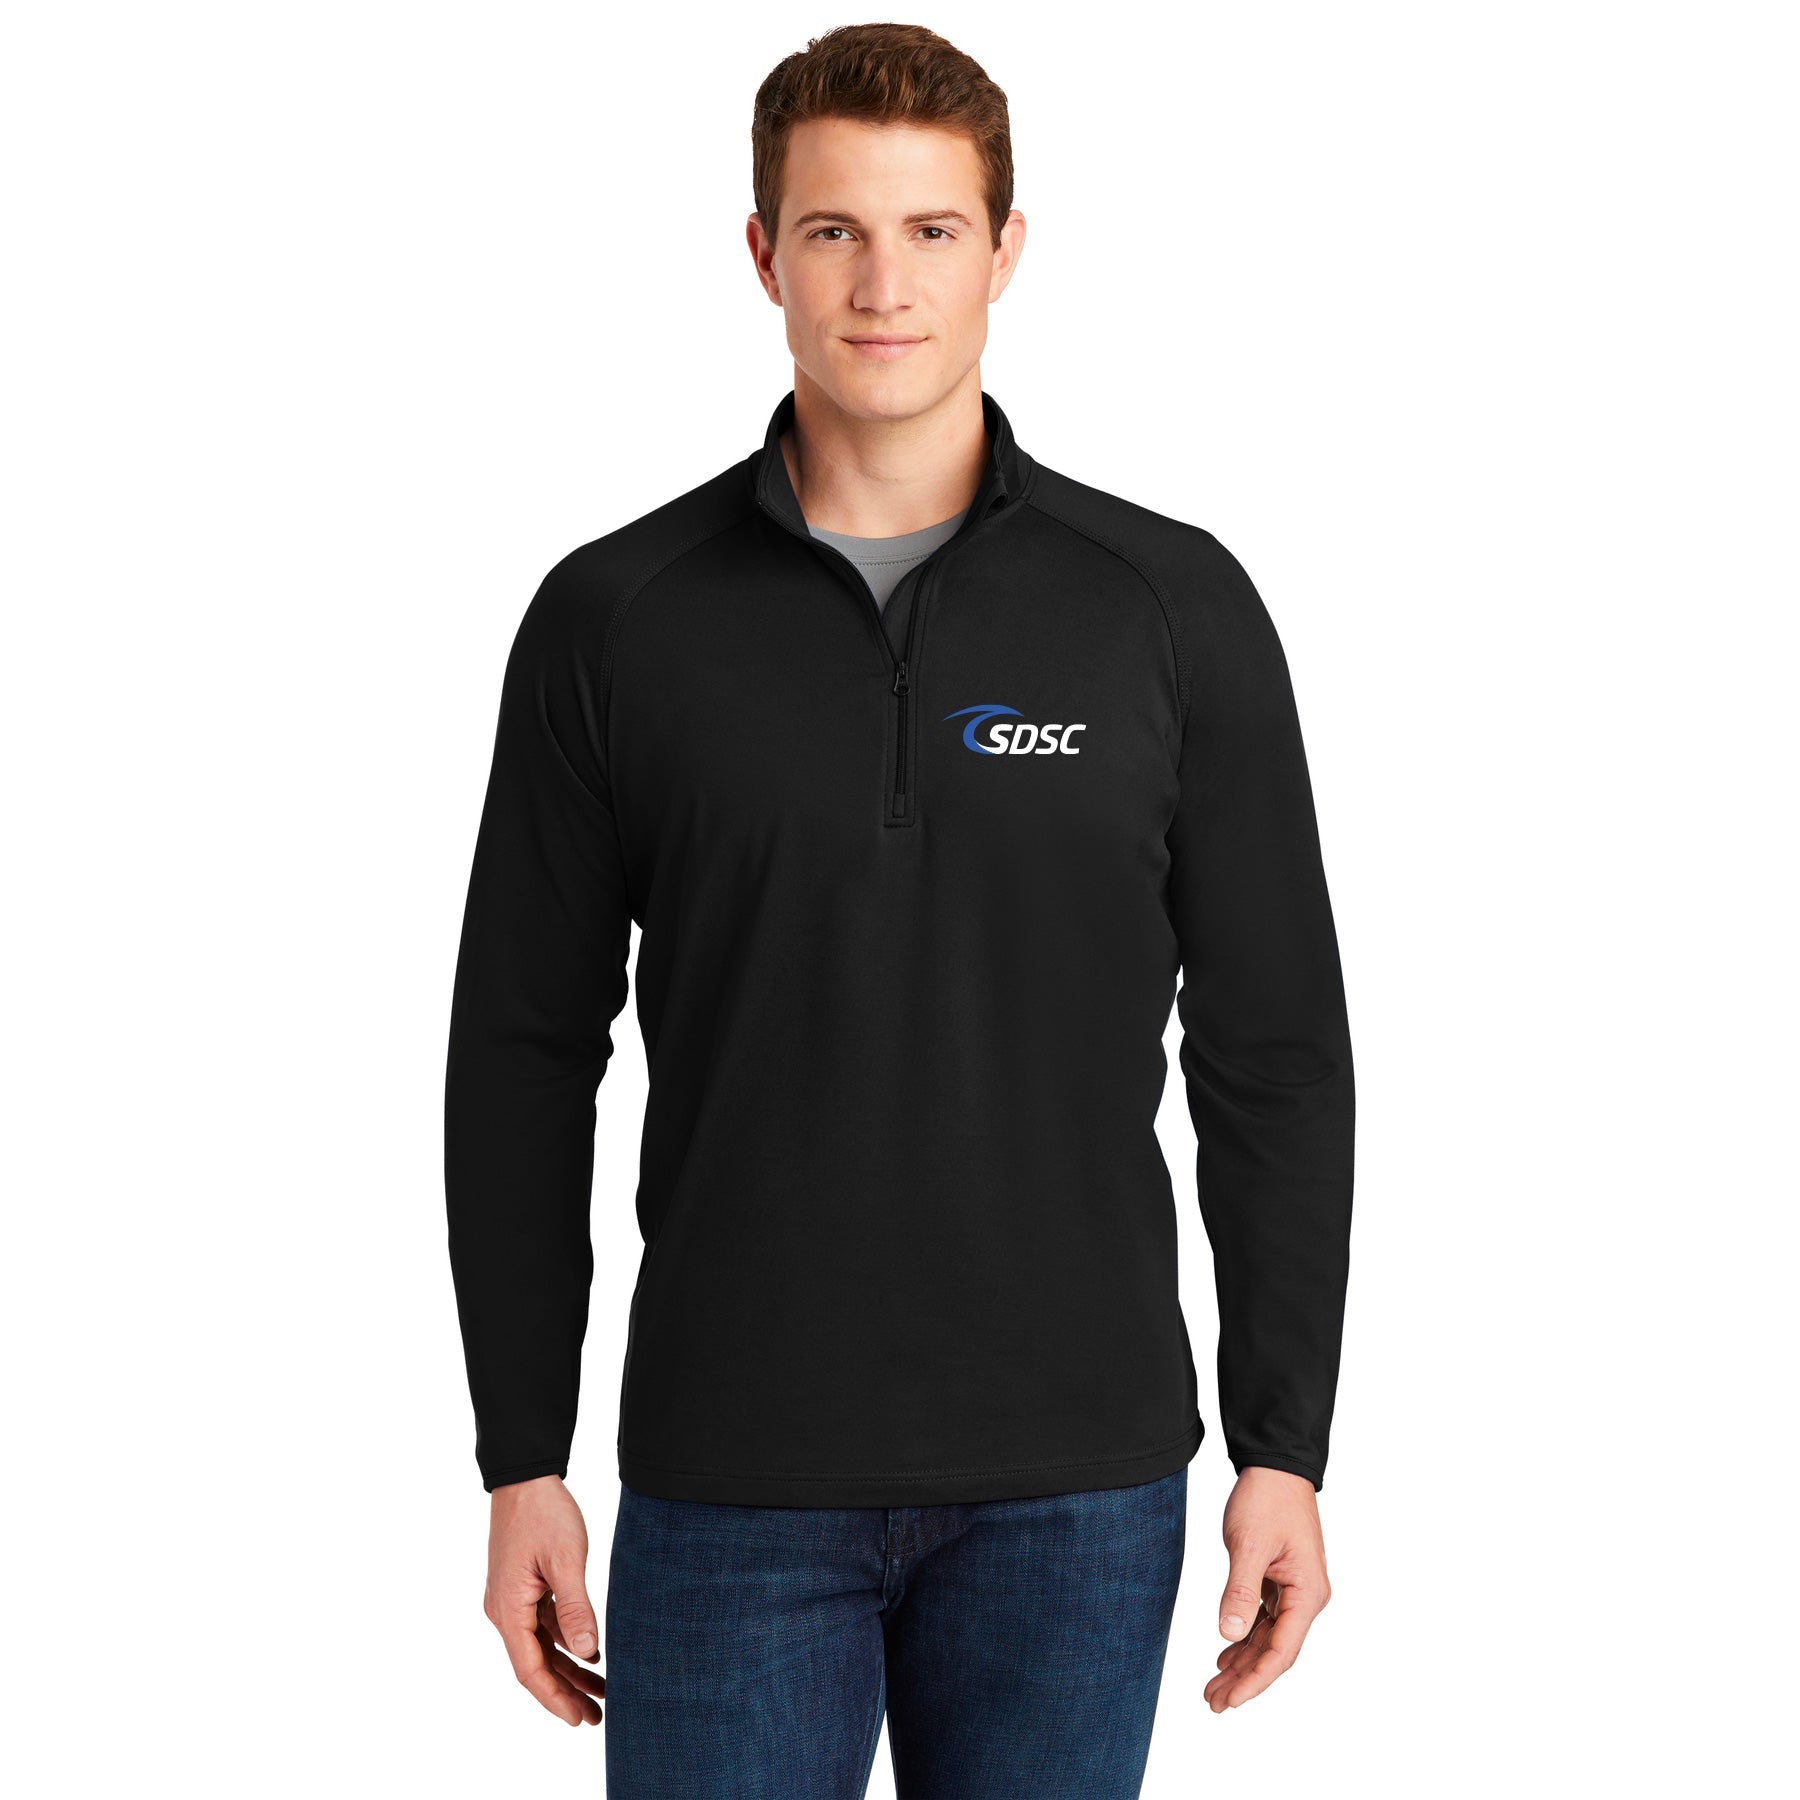 SDSC LOGO WITH NUMBER STRETCH 1/4-ZIP PULLOVER